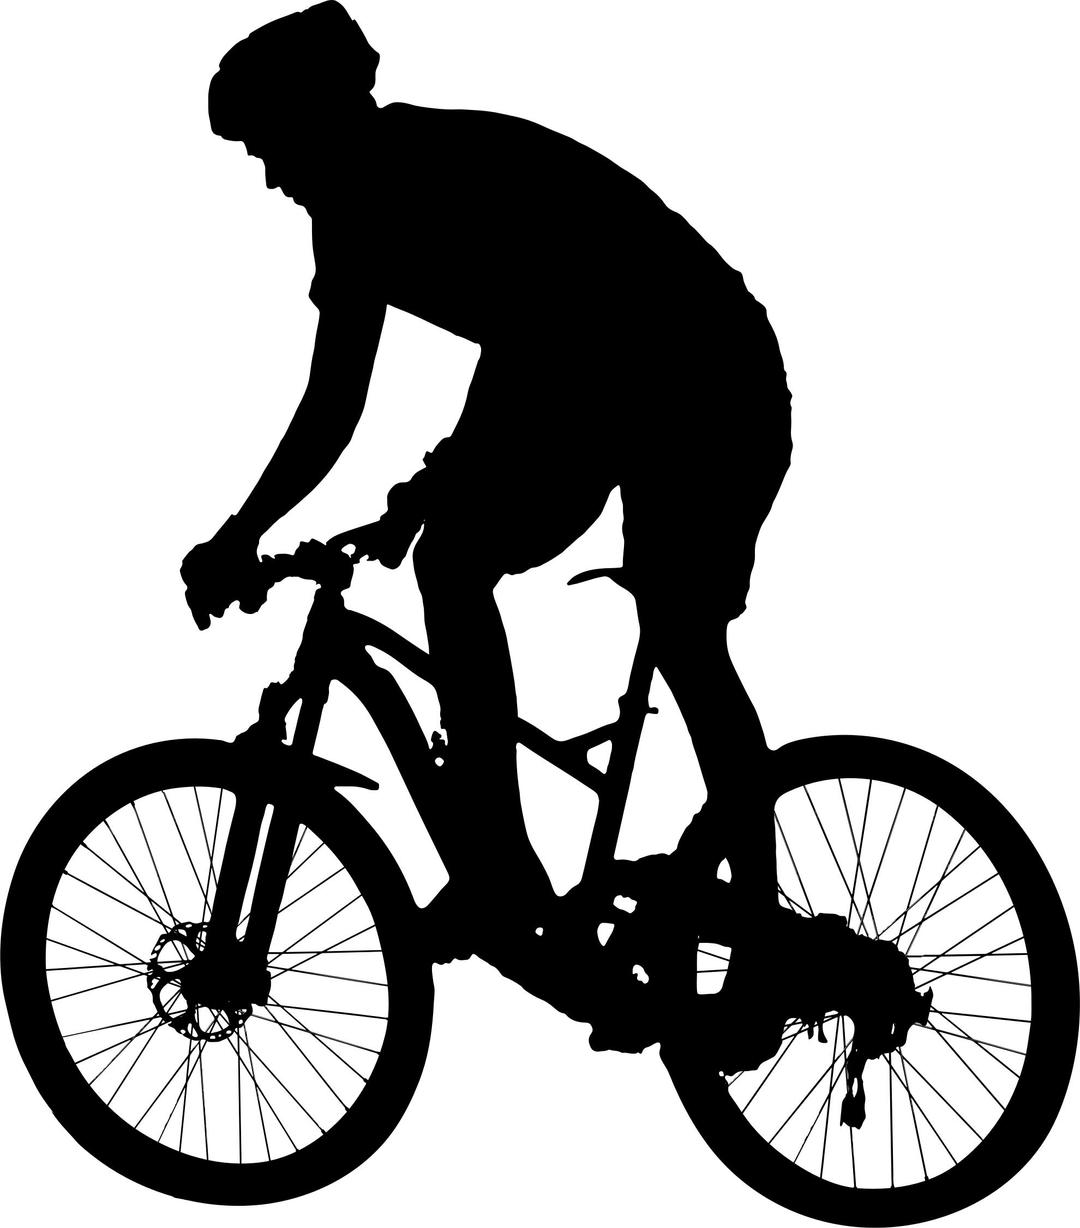 Man Racing On Bike Silhouette png transparent